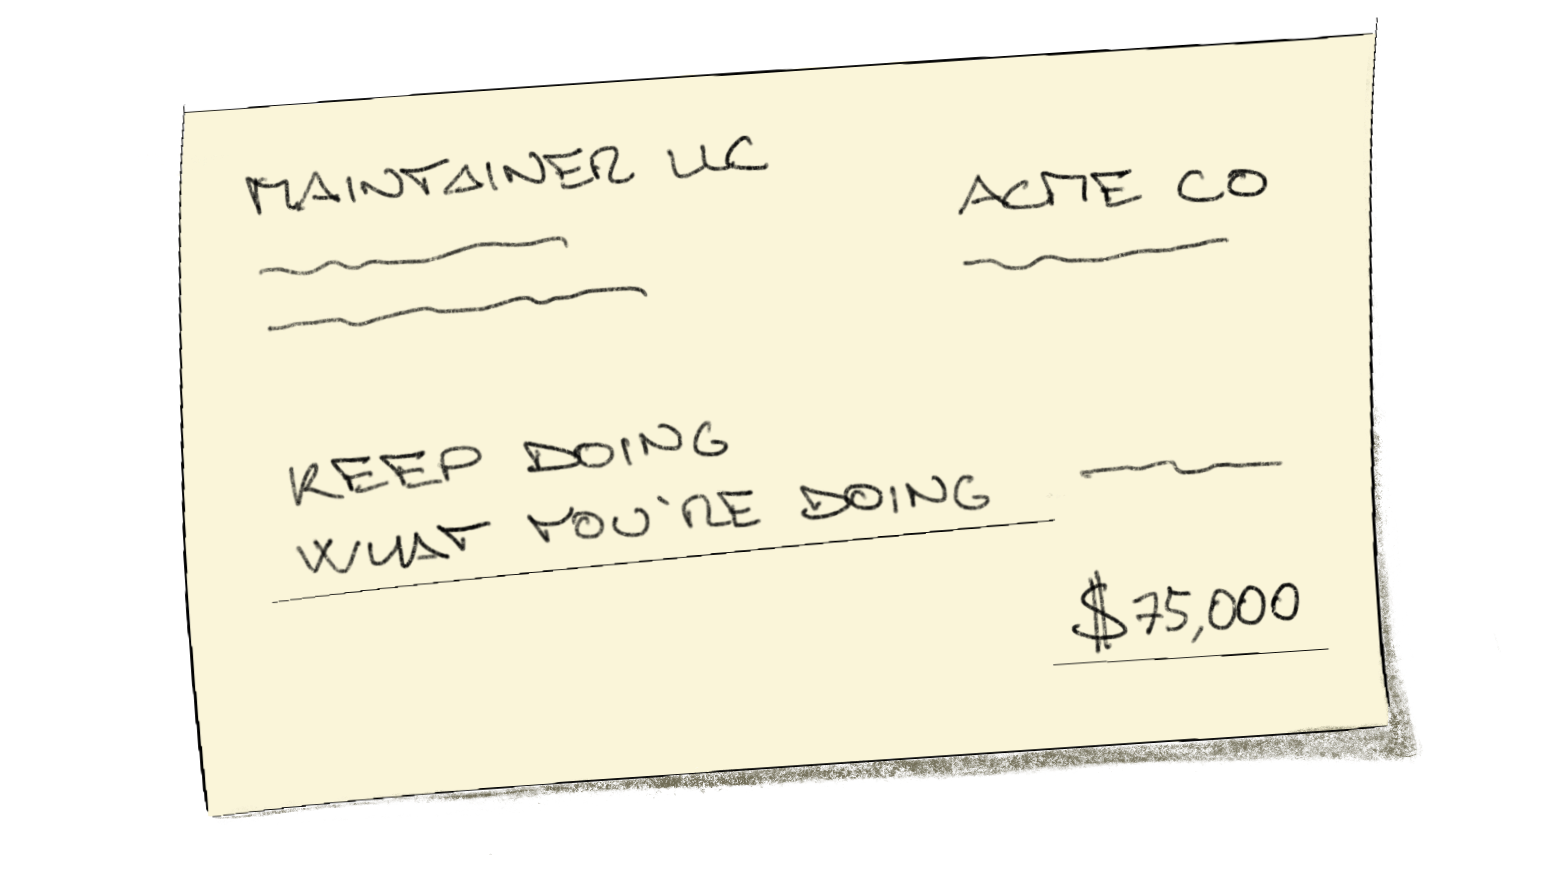 A sketch of an invoice from "Maintainer LLC" to "Acme Co". Only line item is "Keep doing what you're doing" and the total is $75,000.